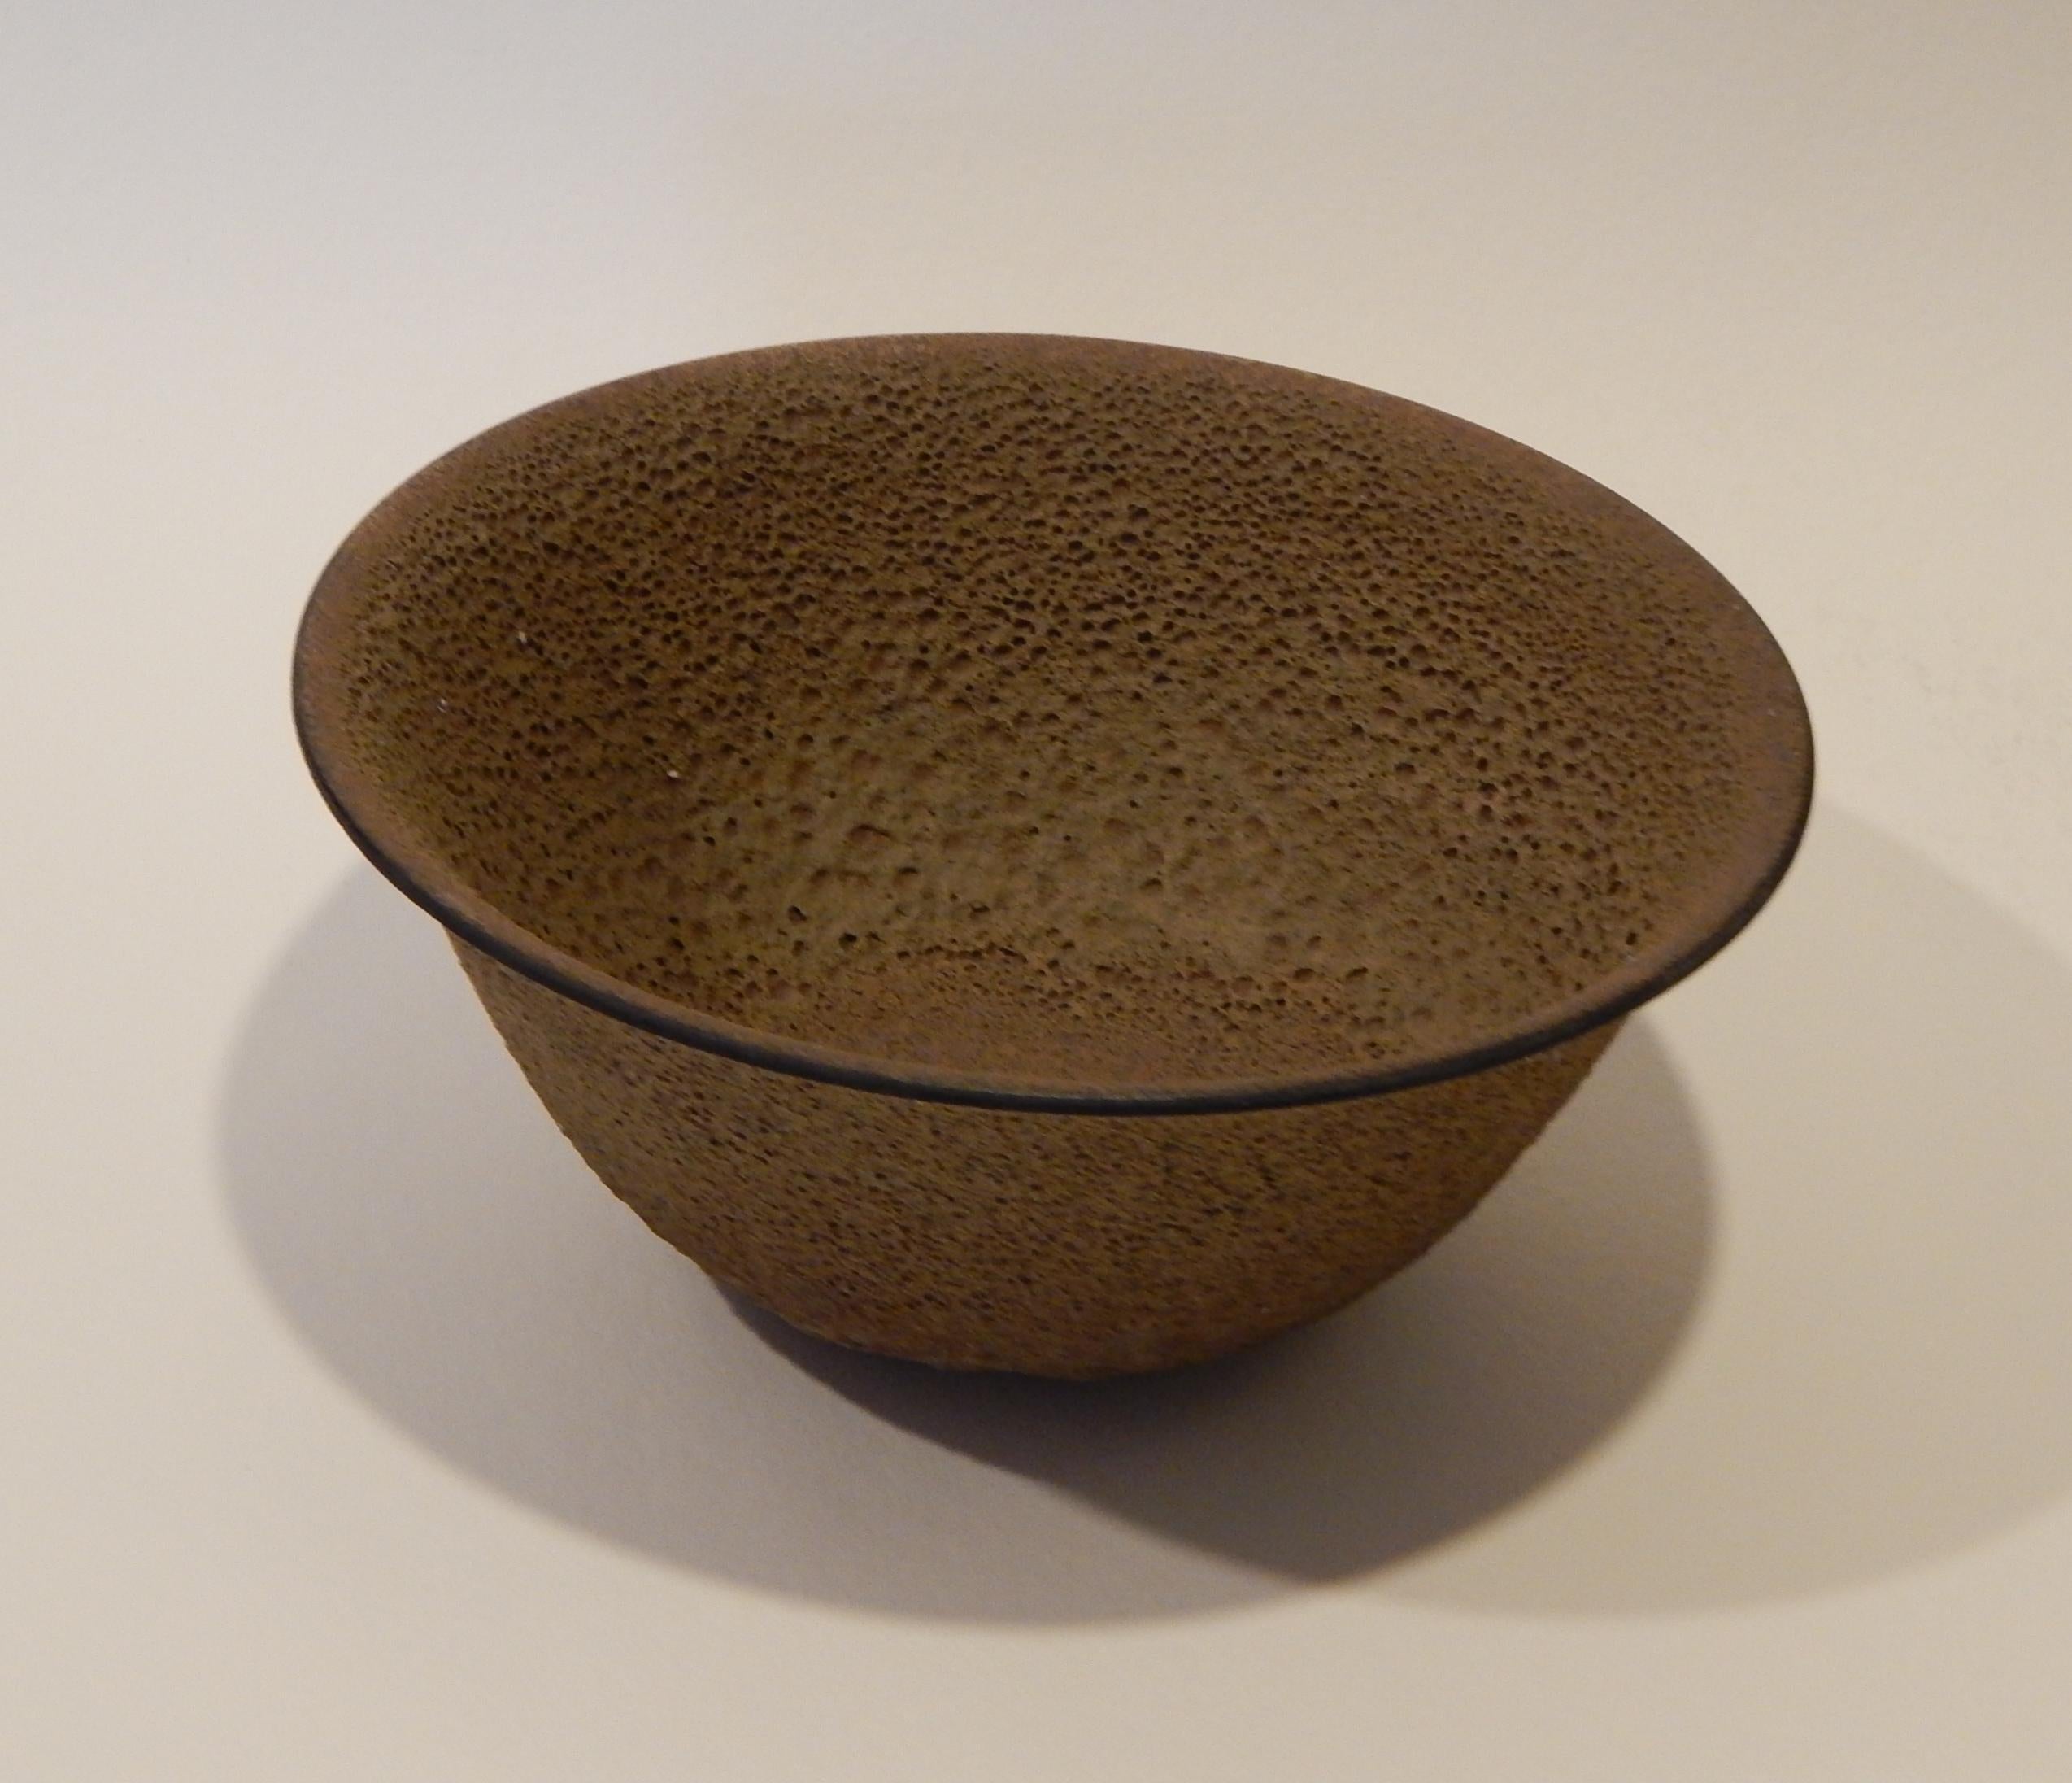 Flared studio bowl with lava glaze by well-known California potter James Lovera (1920-2015).
Perfect for a centerpiece bowl in a modern home. Measures 4